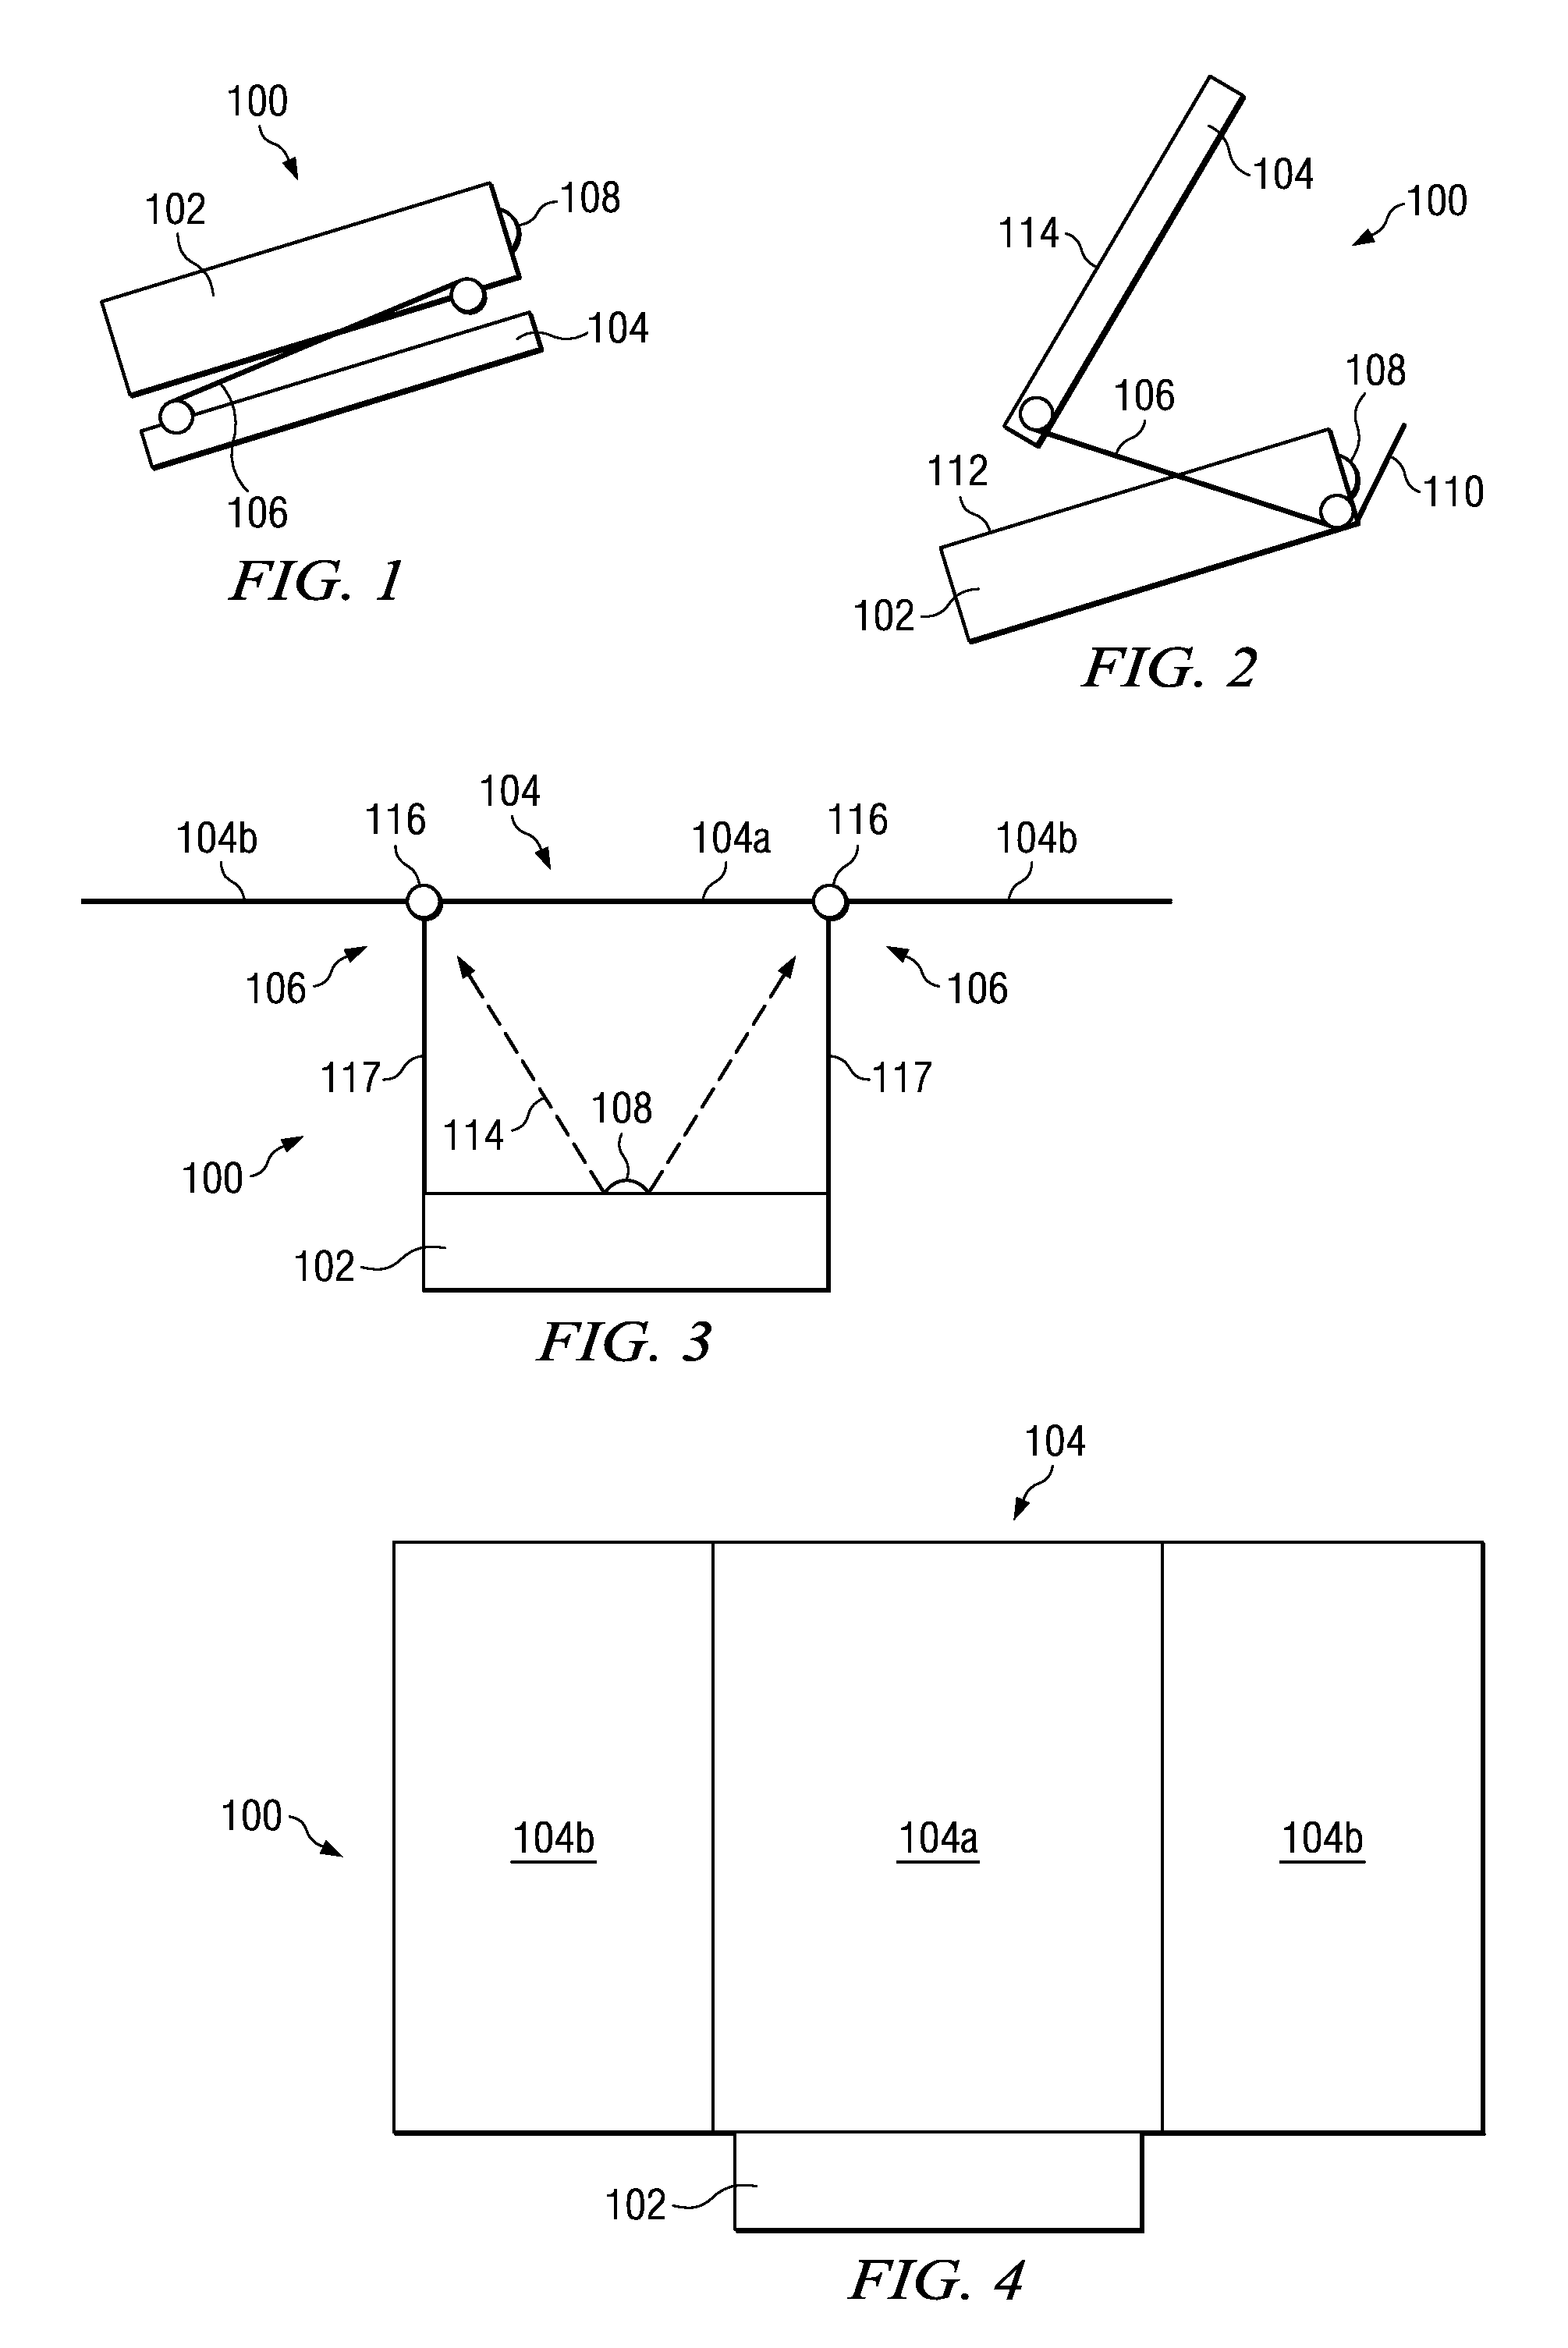 Display Systems and Methods for Mobile Devices